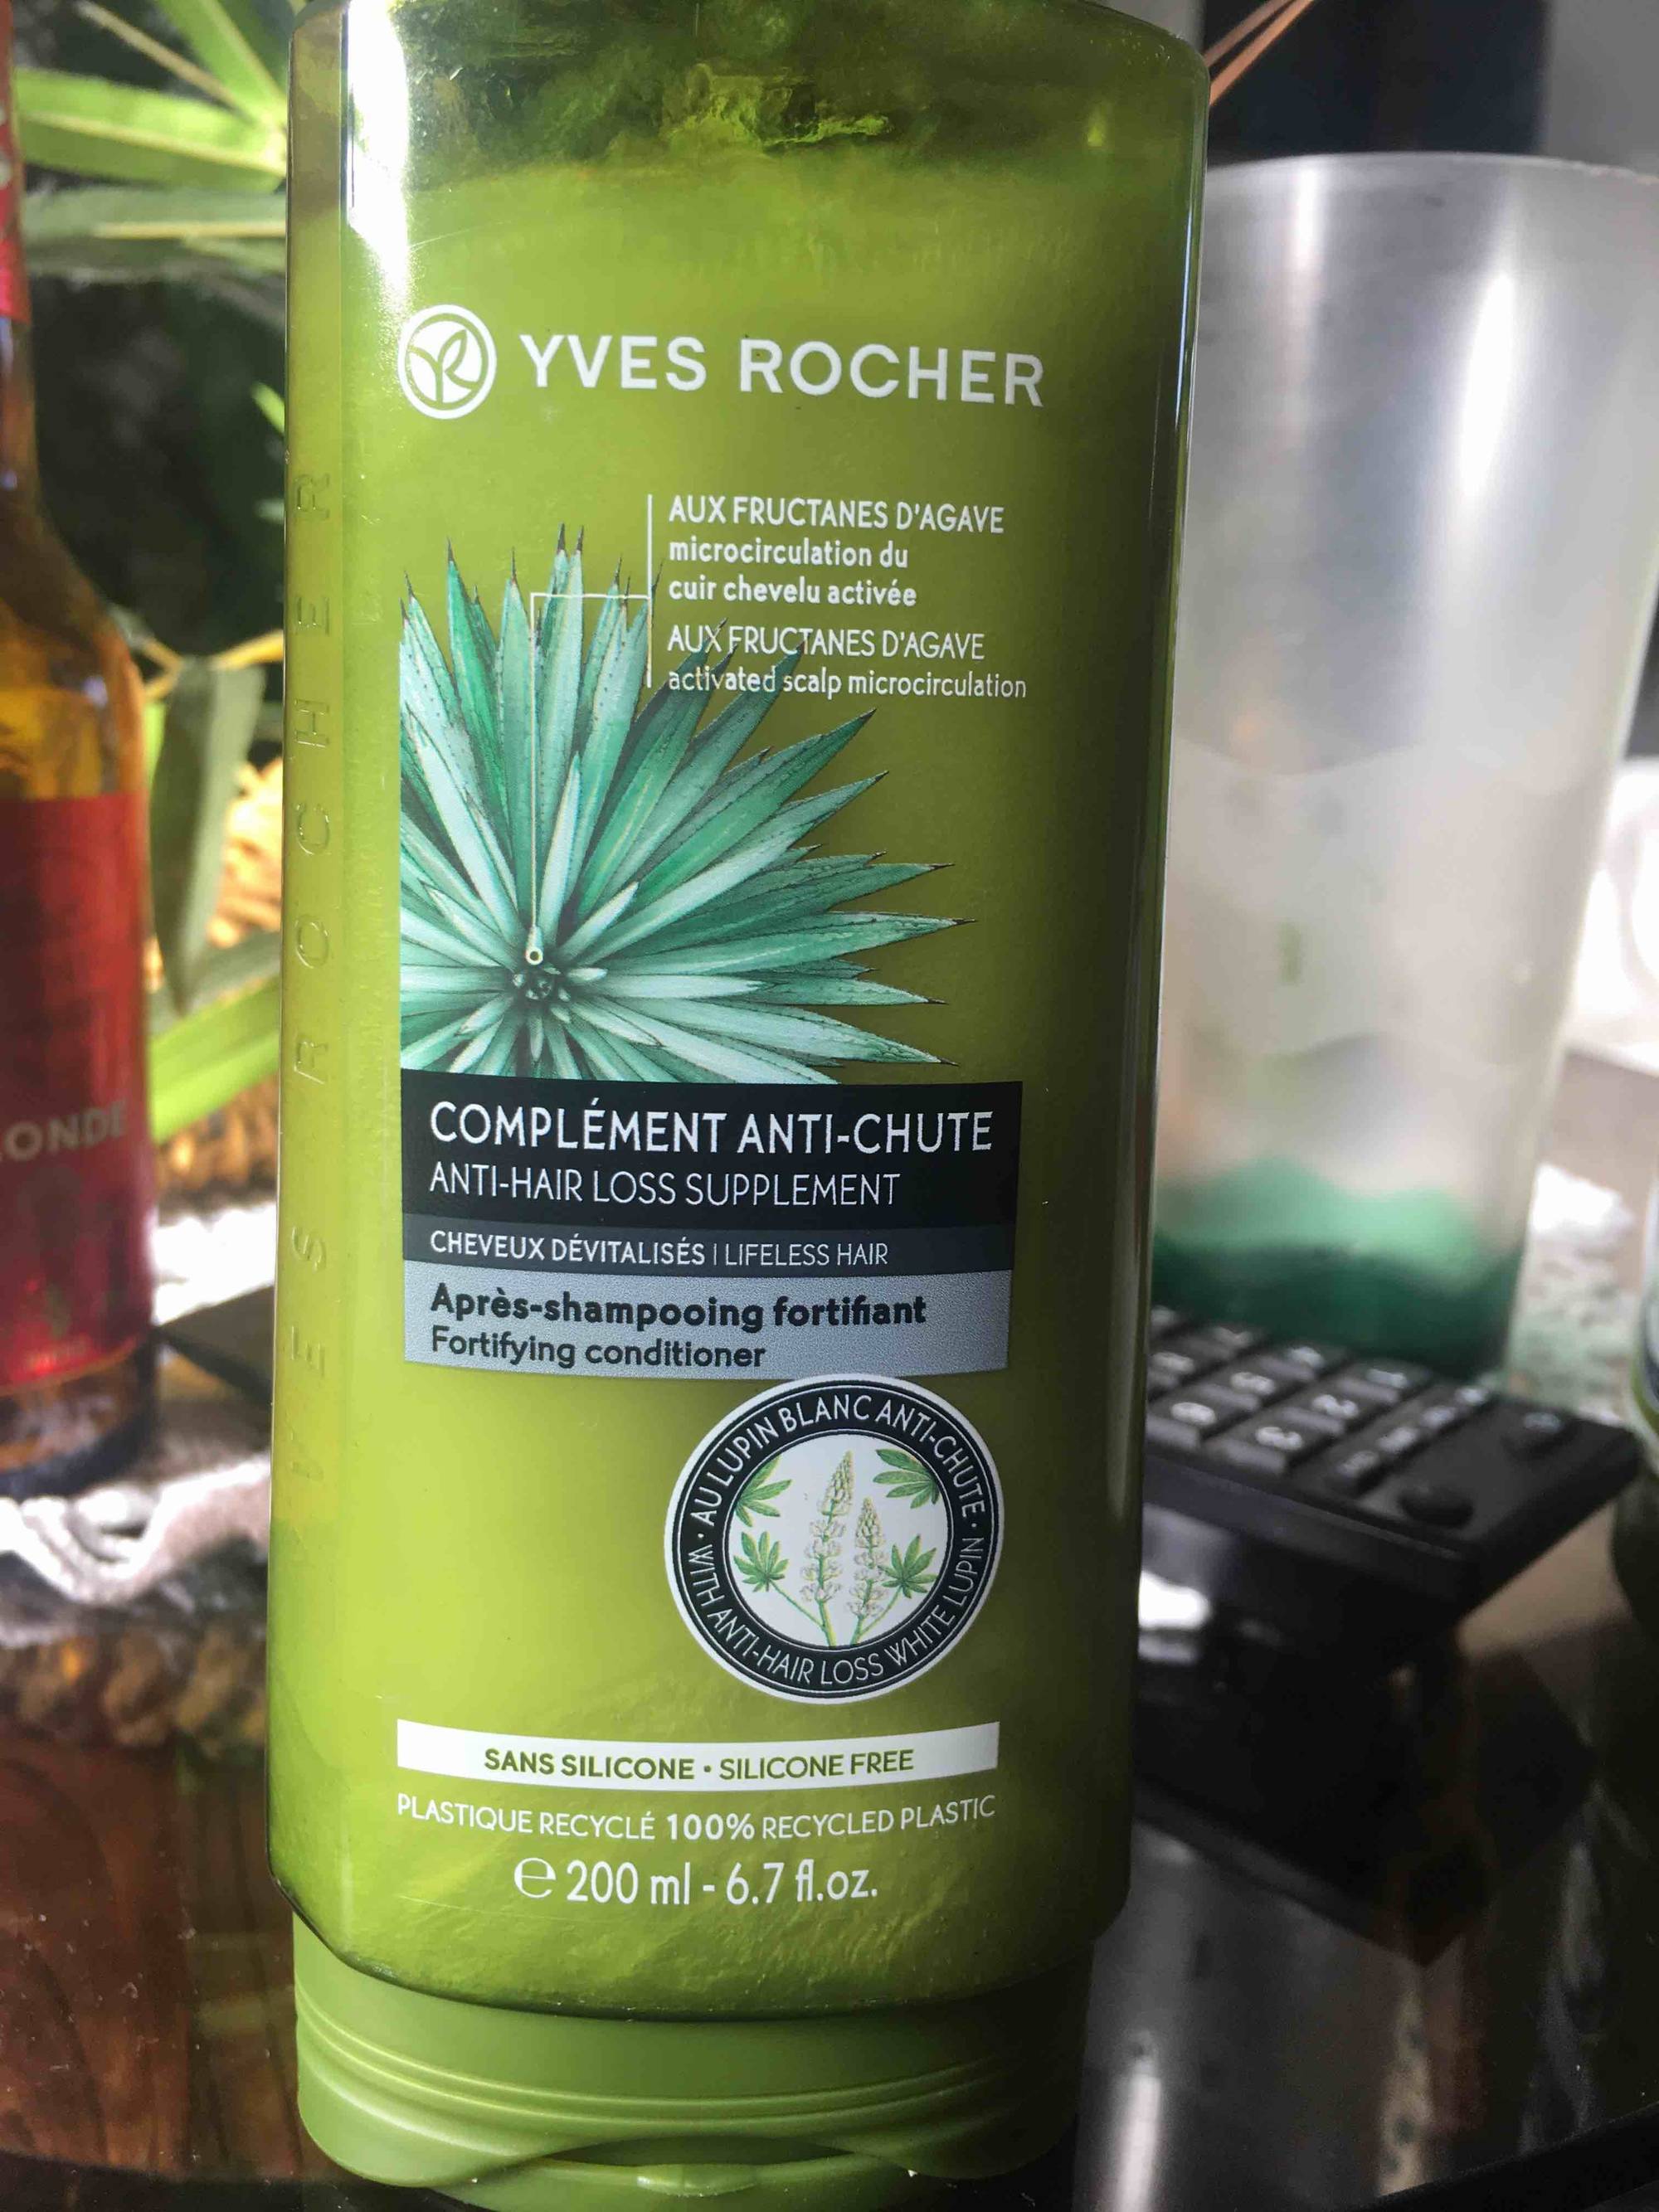 YVES ROCHER - Complément anti-chute - Après-shampooing fortifiant